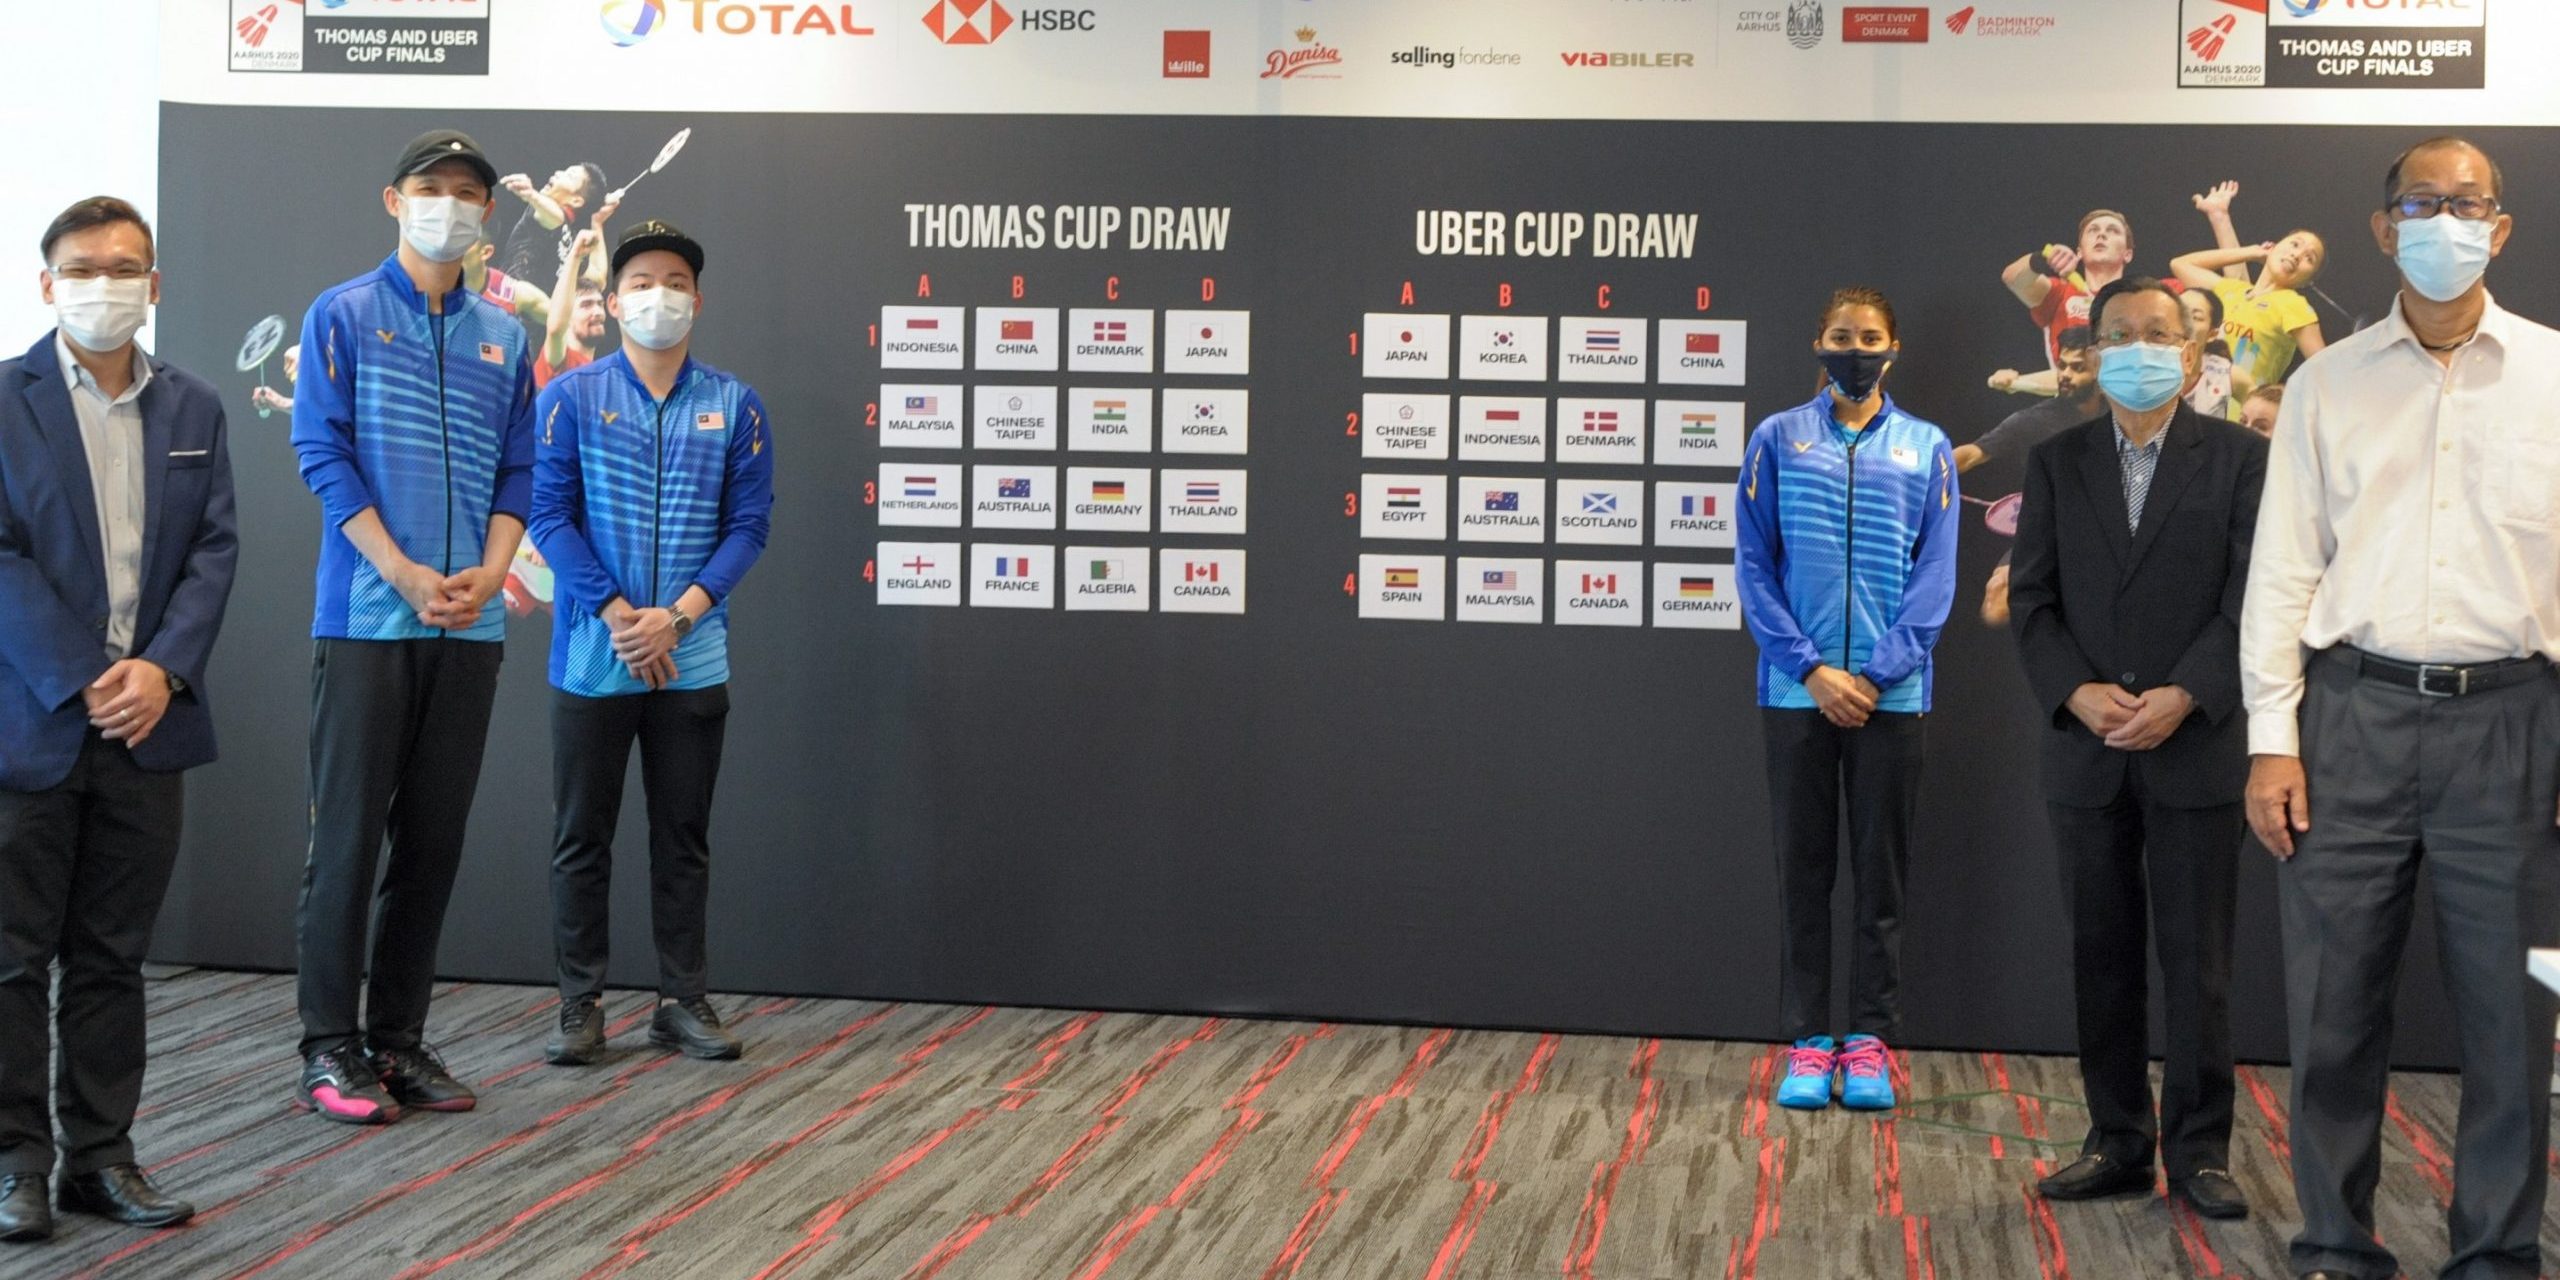 Team Australia to face top Asian countries in TOTAL BWF Thomas and Uber Cup Finals 2020